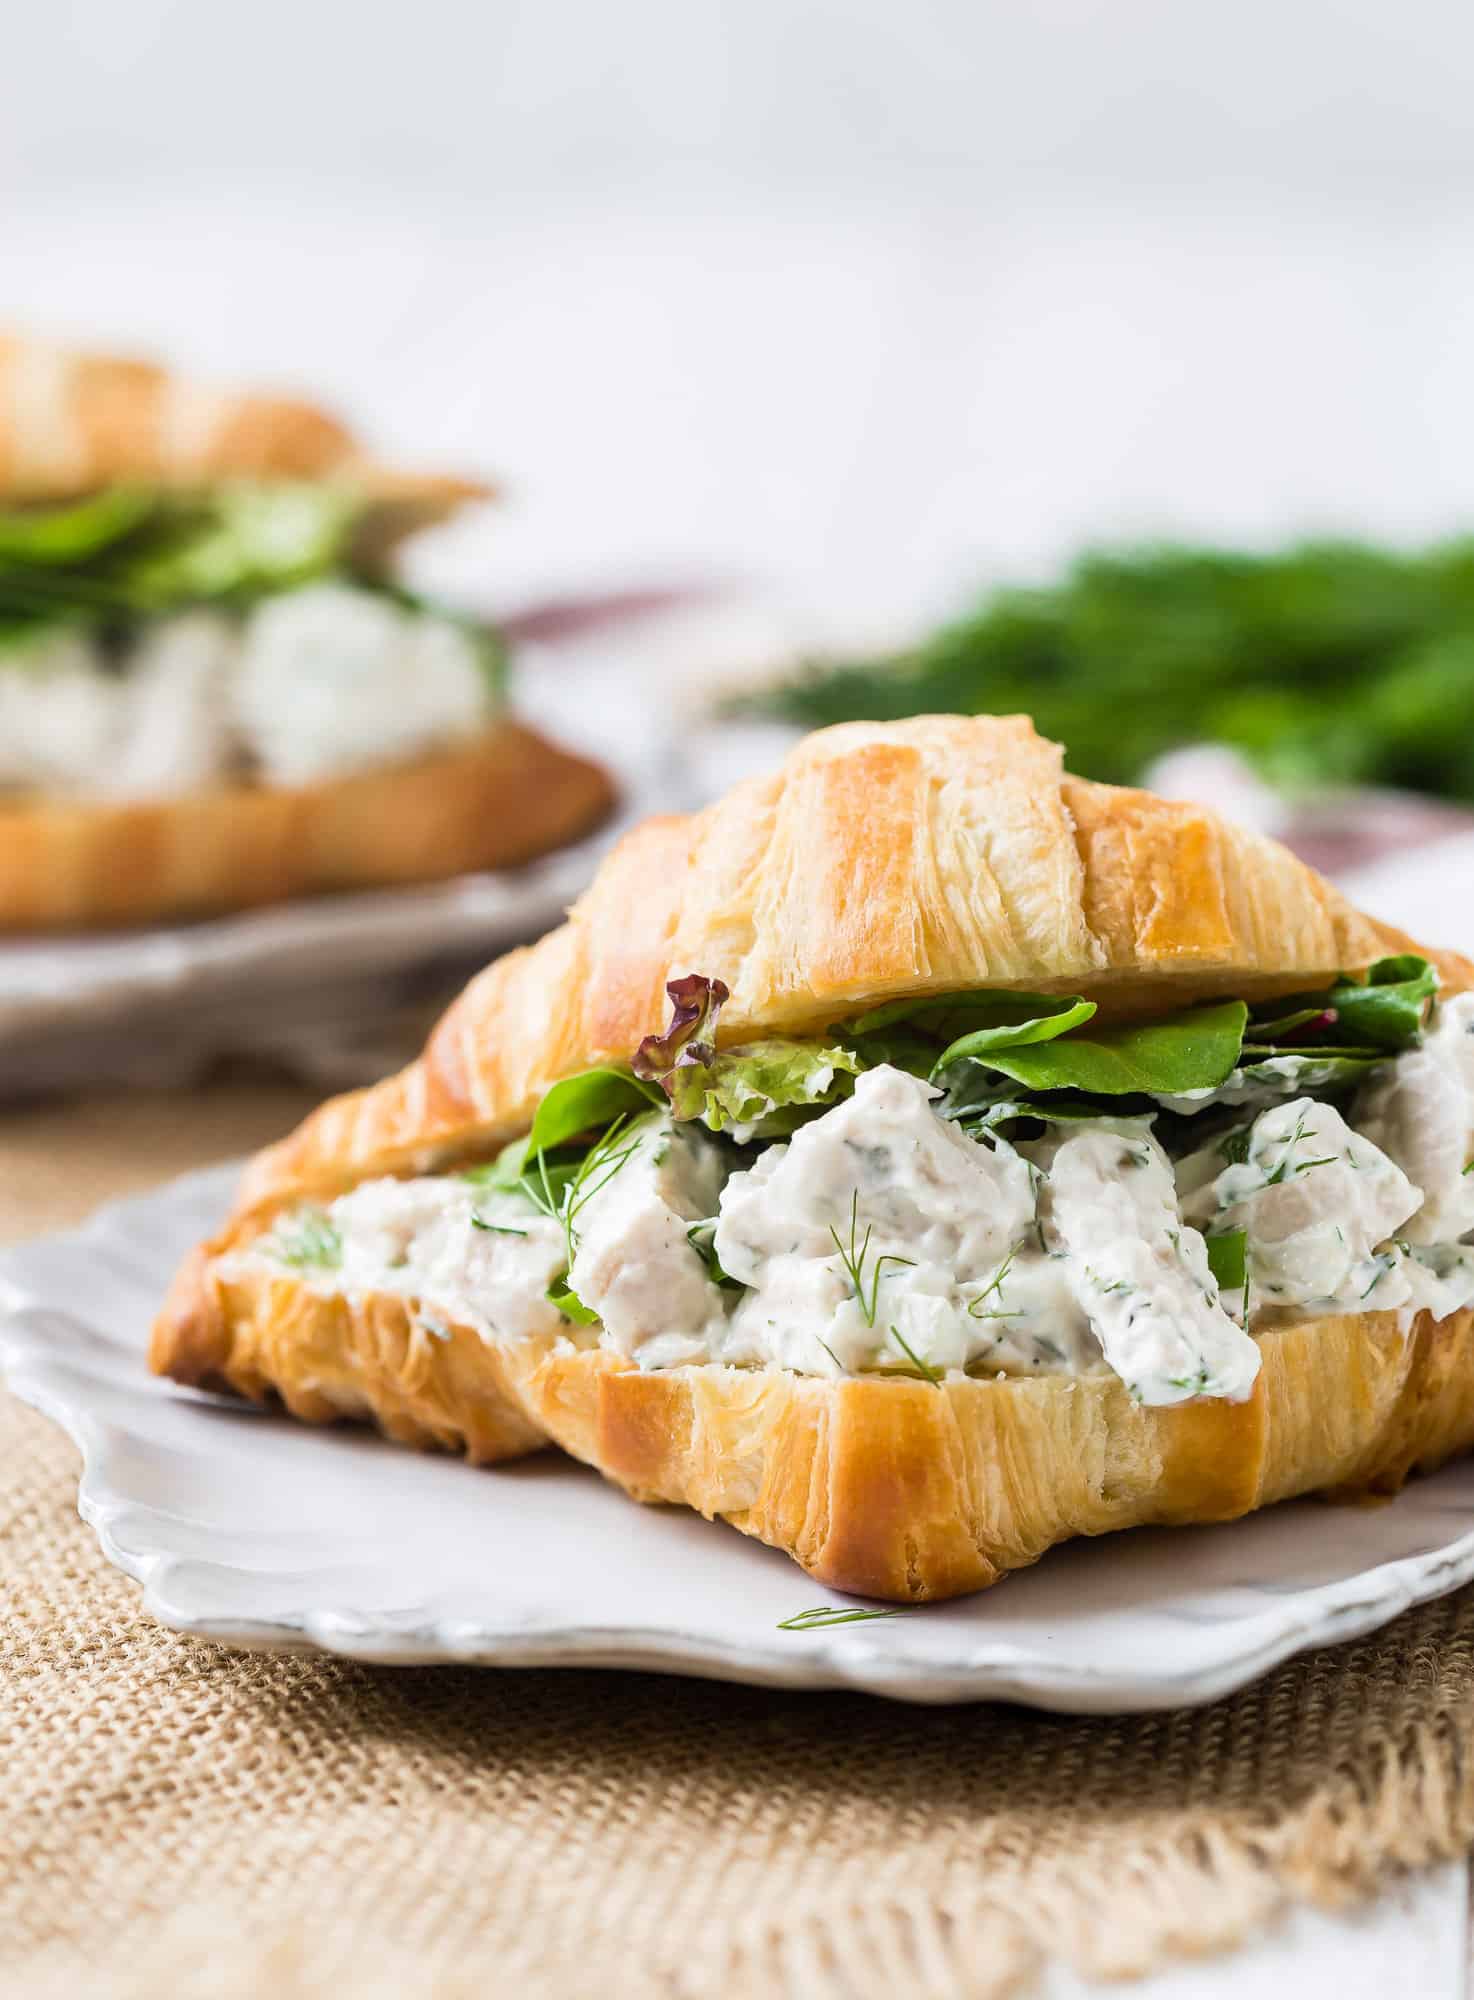 Chicken salad with dill on a croissant.